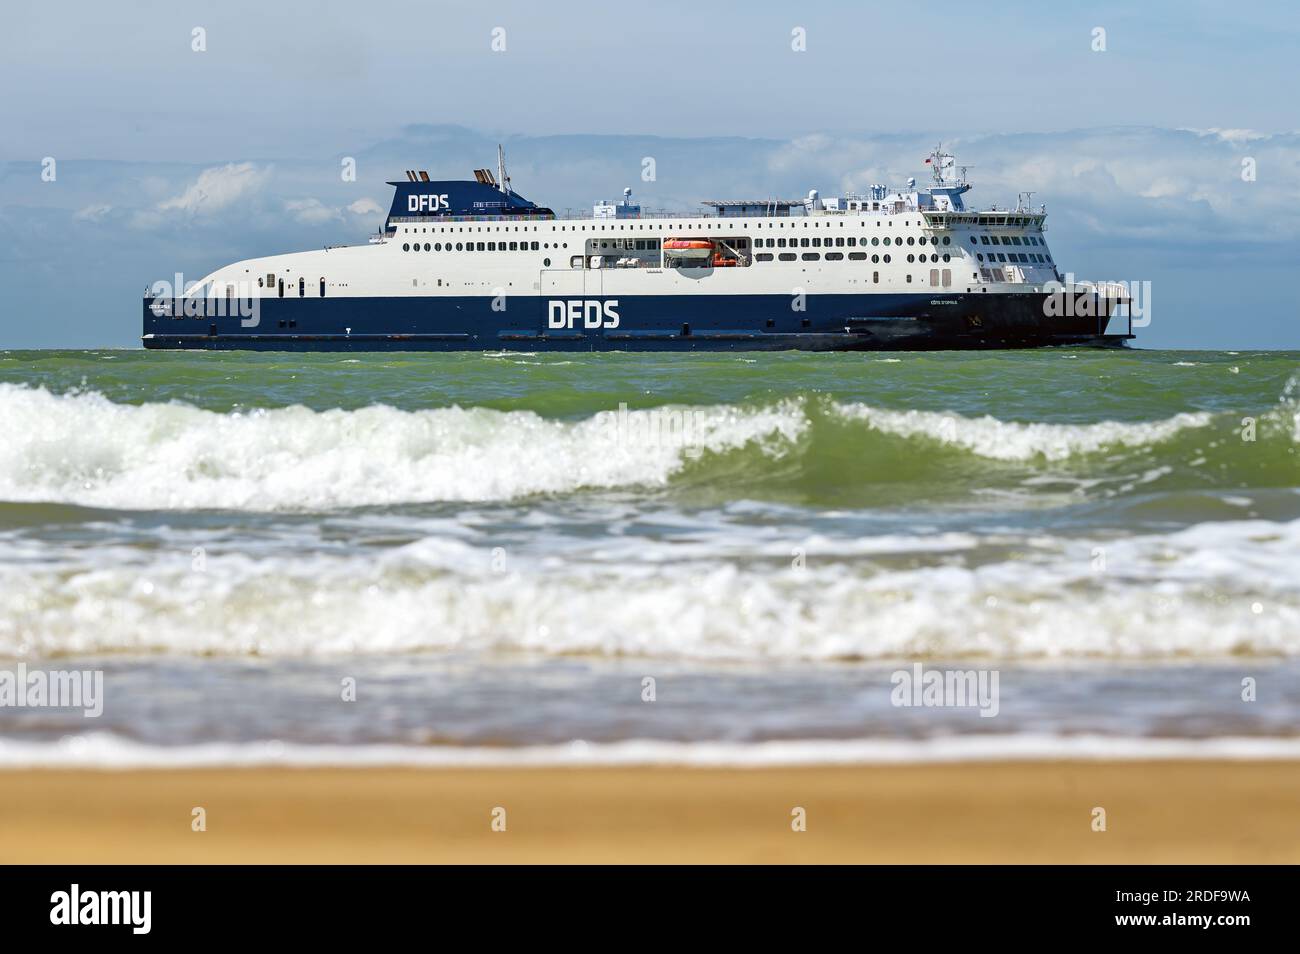 Cote d'Opale is an E-Flexer cross-Channel ferry operated by DFDS ...